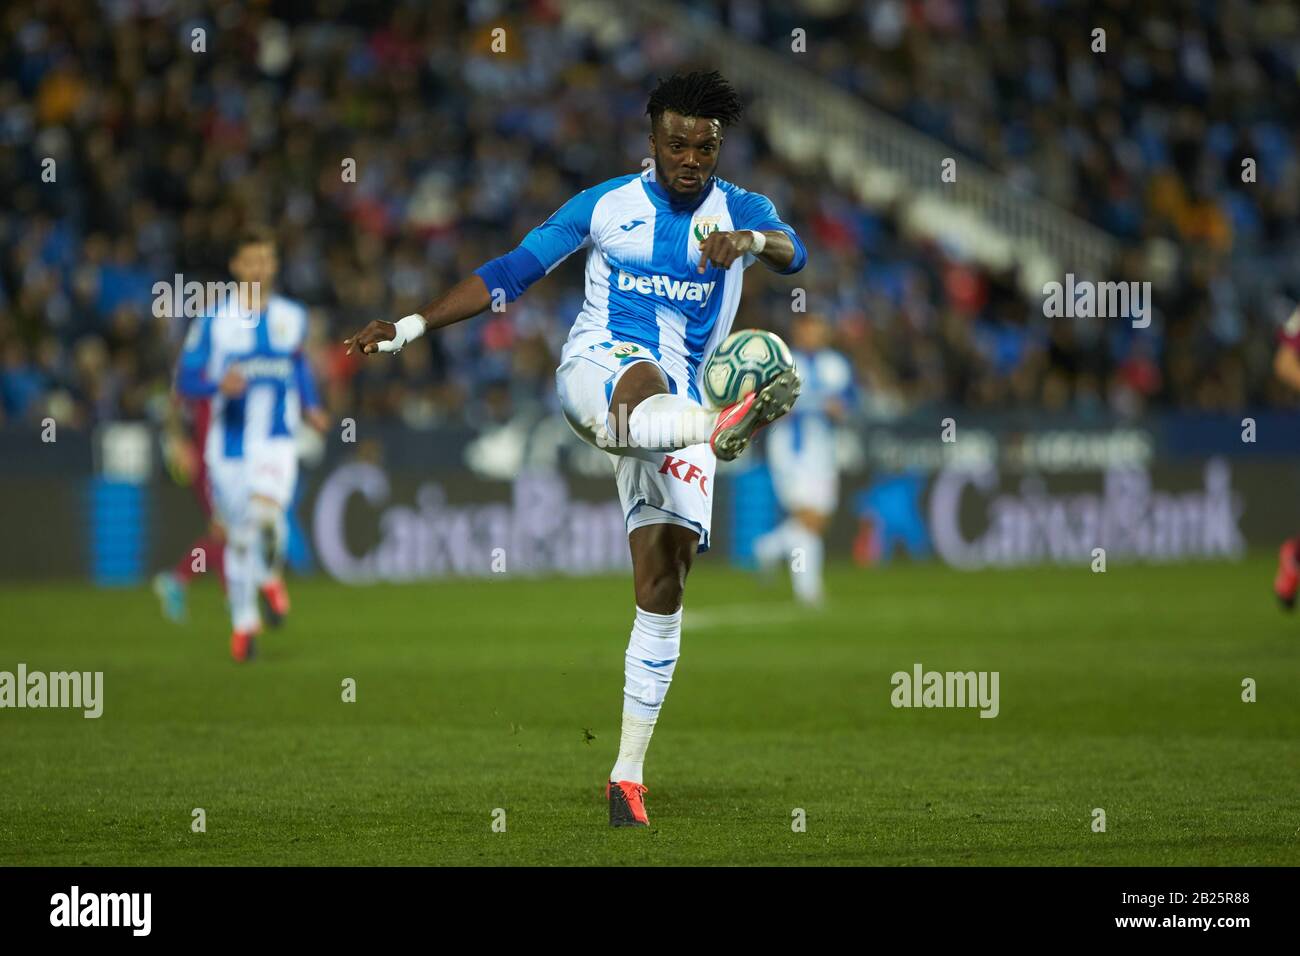 Madrid, Spain. 29th Feb, 2020. CHIDOZIE AWAZIEM DURING THE MATCH LEGANES CD VERSUS ALAVES IN BUTARQUE STADIUM. SATURDAY, 29 FEBRUARY 2020. Credit: CORDON PRESS/Alamy Live News Stock Photo